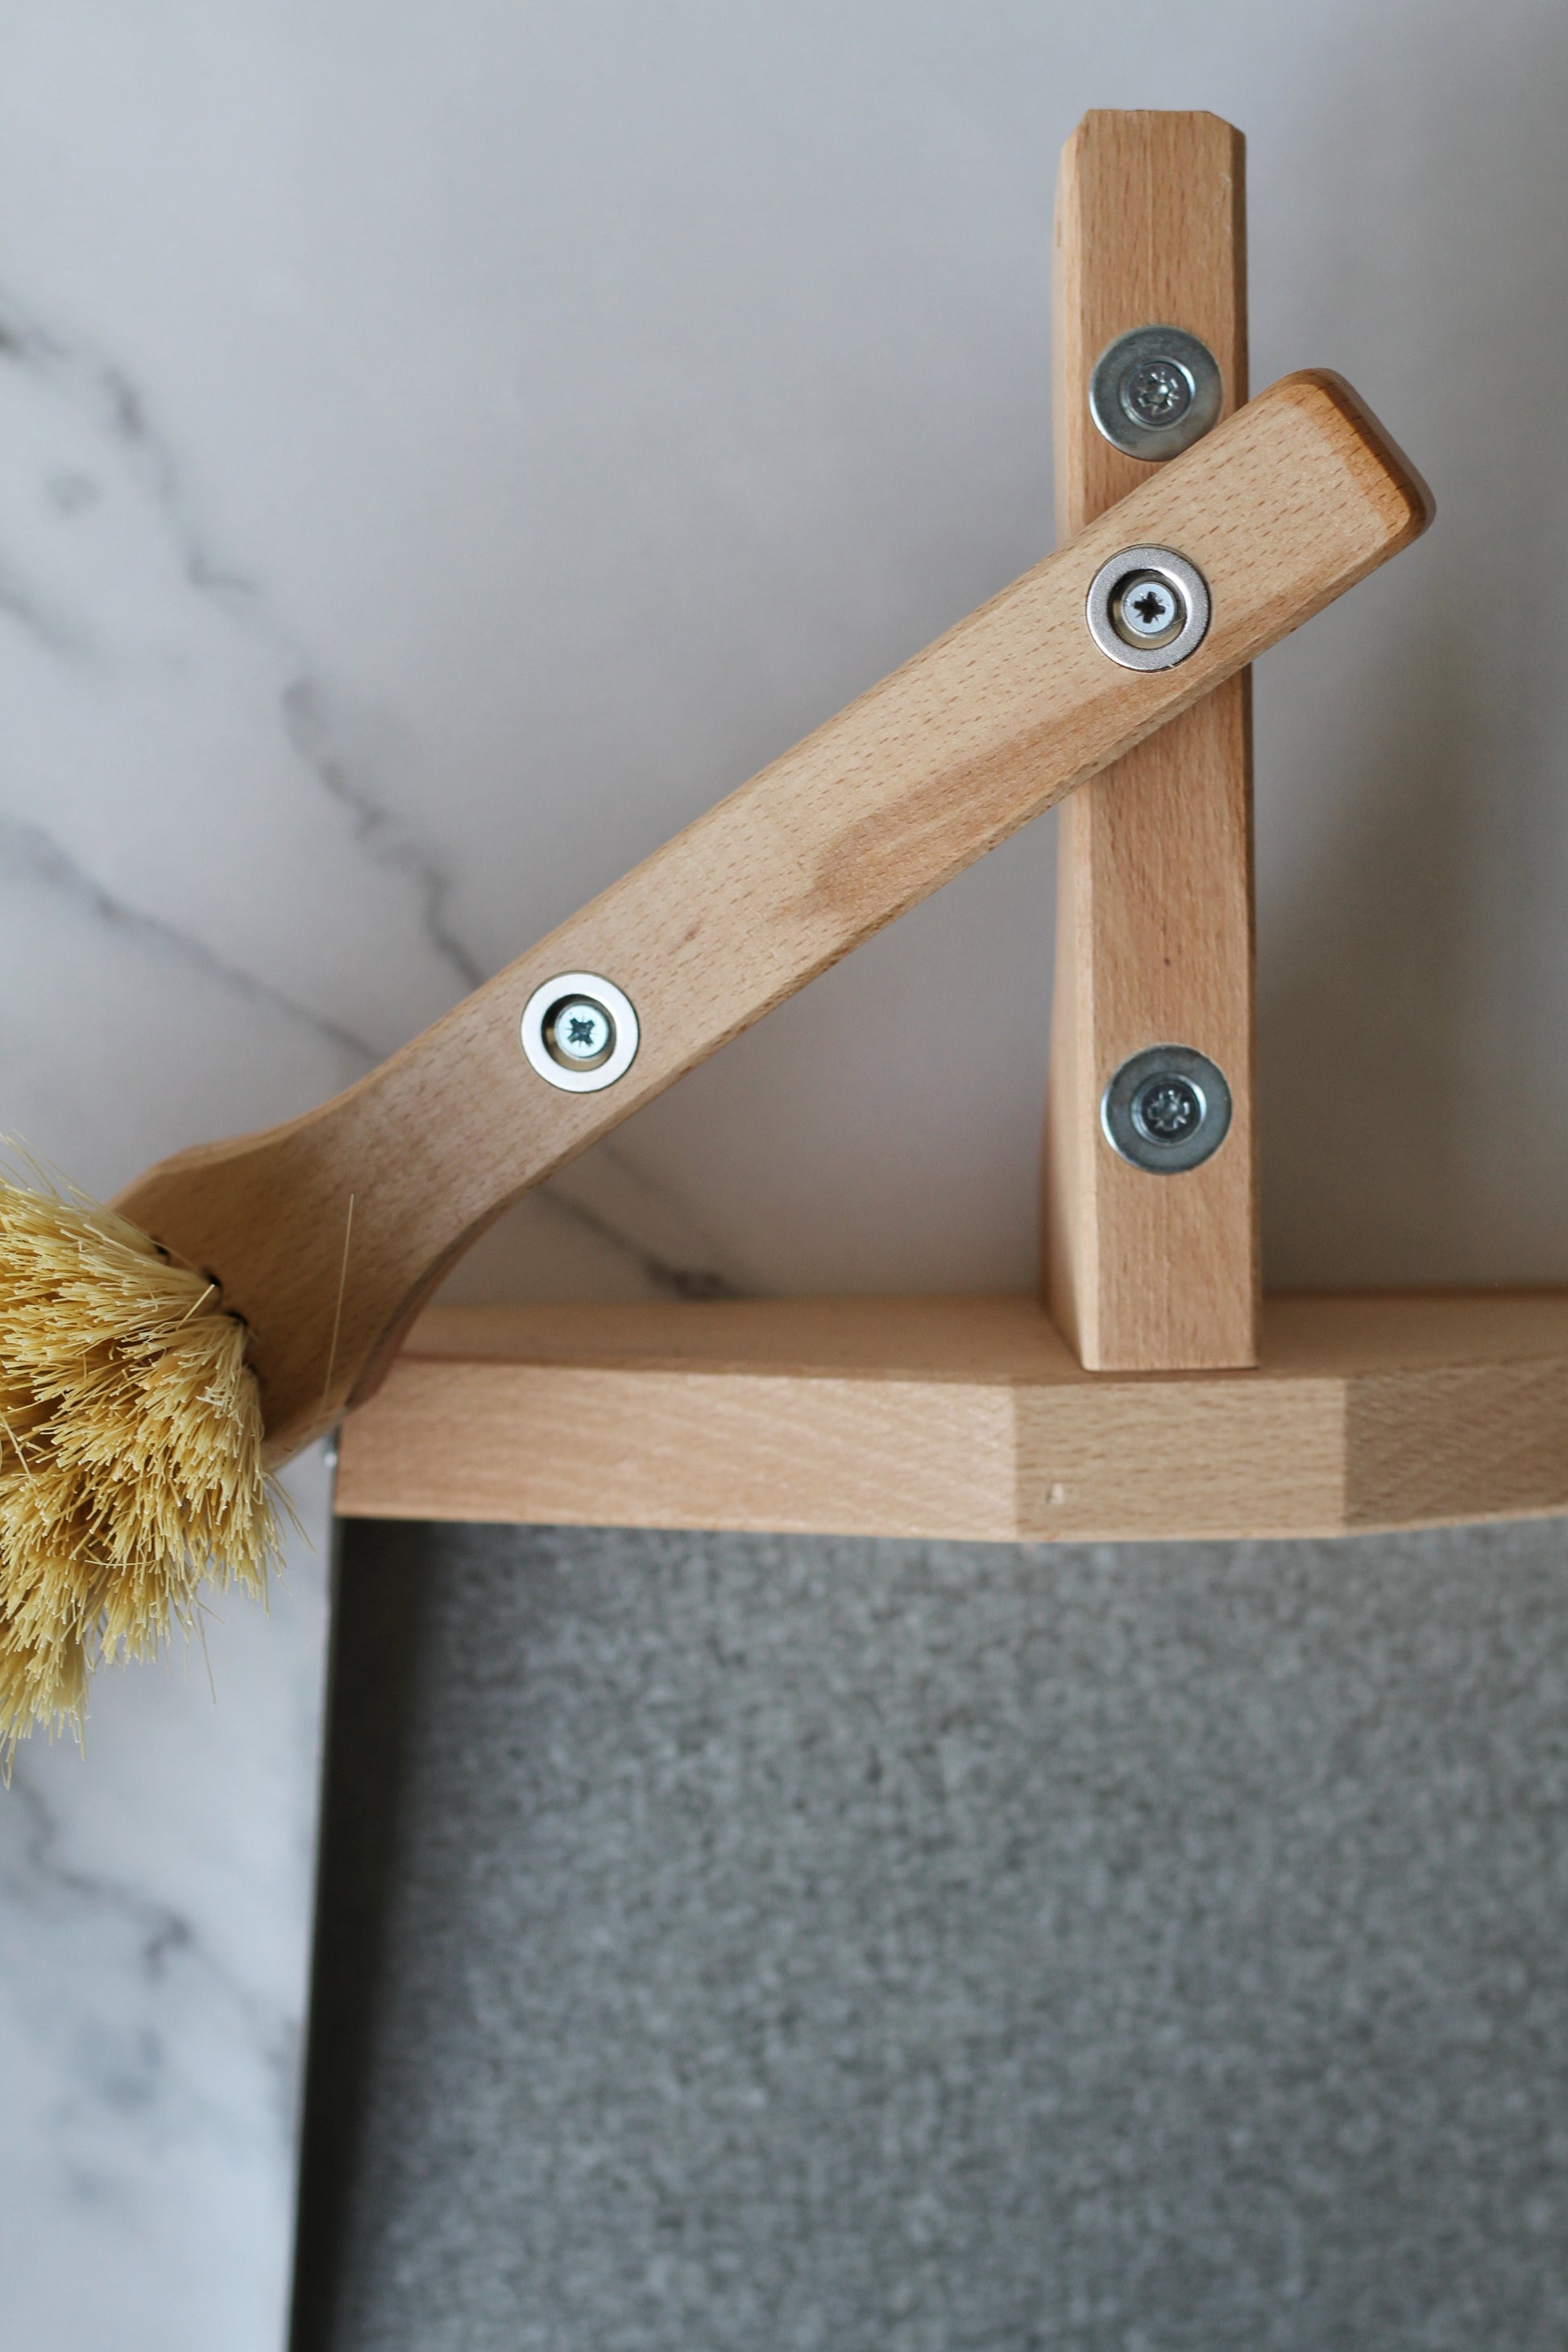 metal and wood dustpan and brush held together with magnets